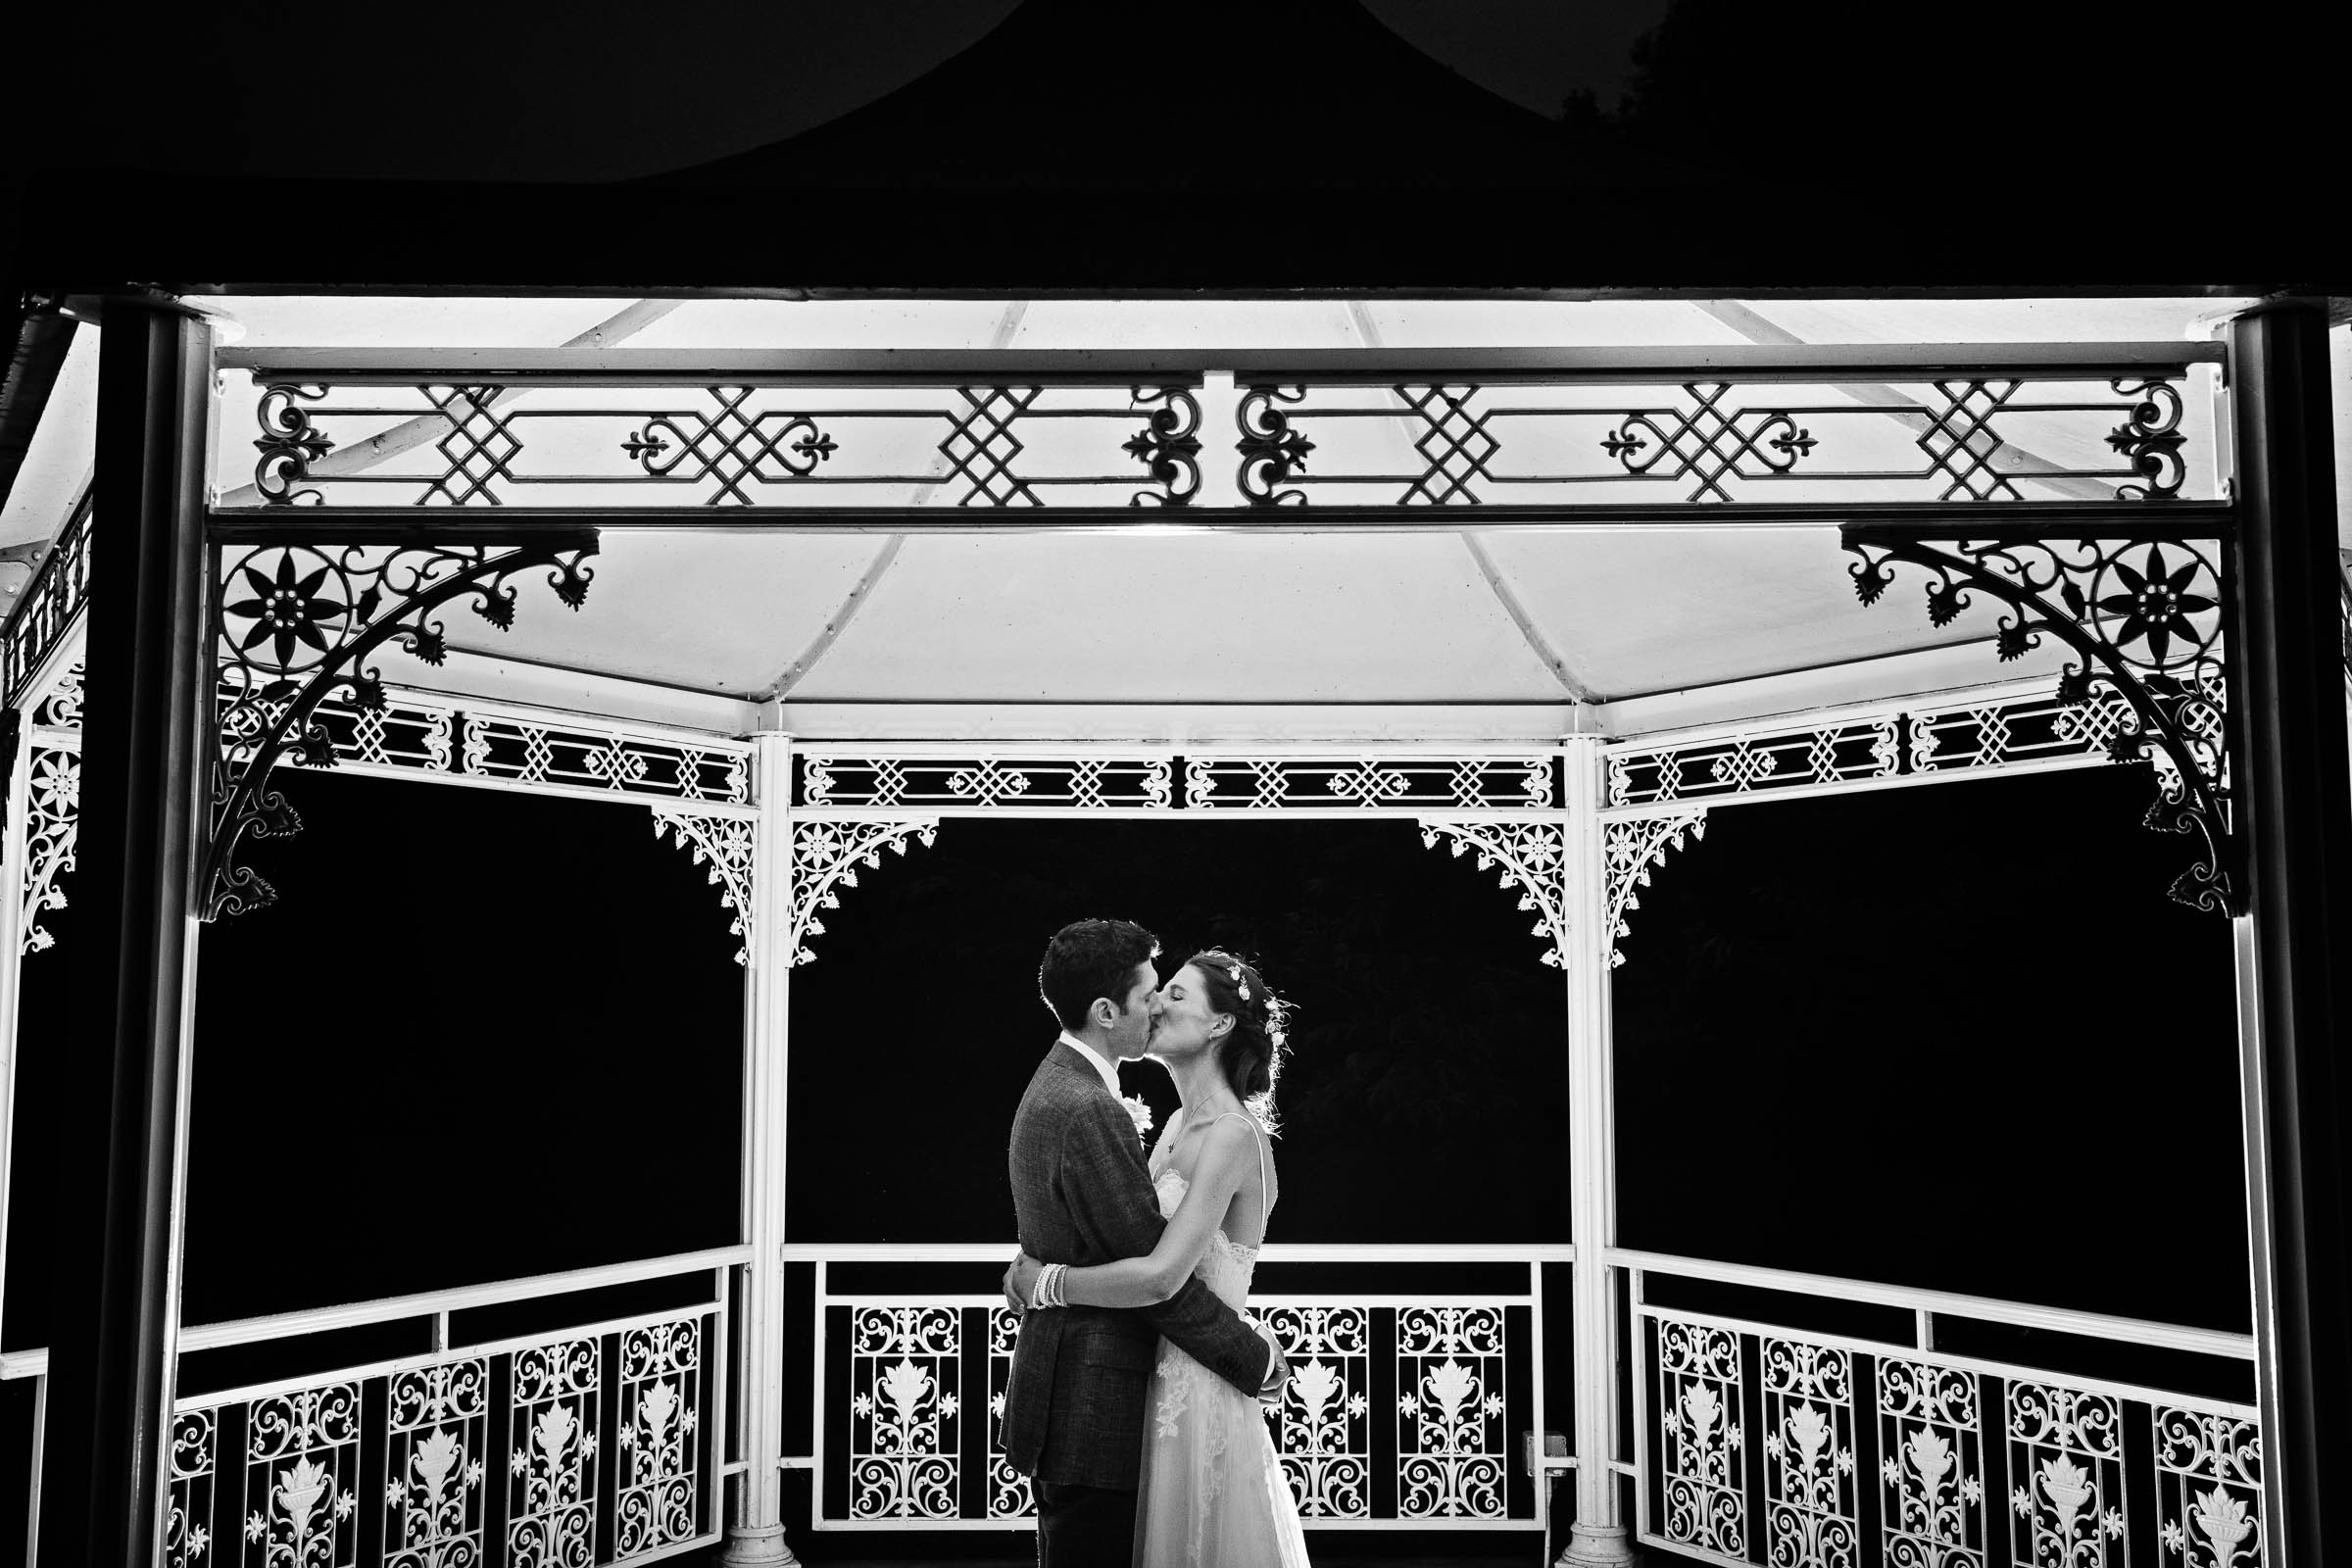 Black and white photograph of bride and groom embracing (with a kiss) underneath a bandstand that is illuminated at night.